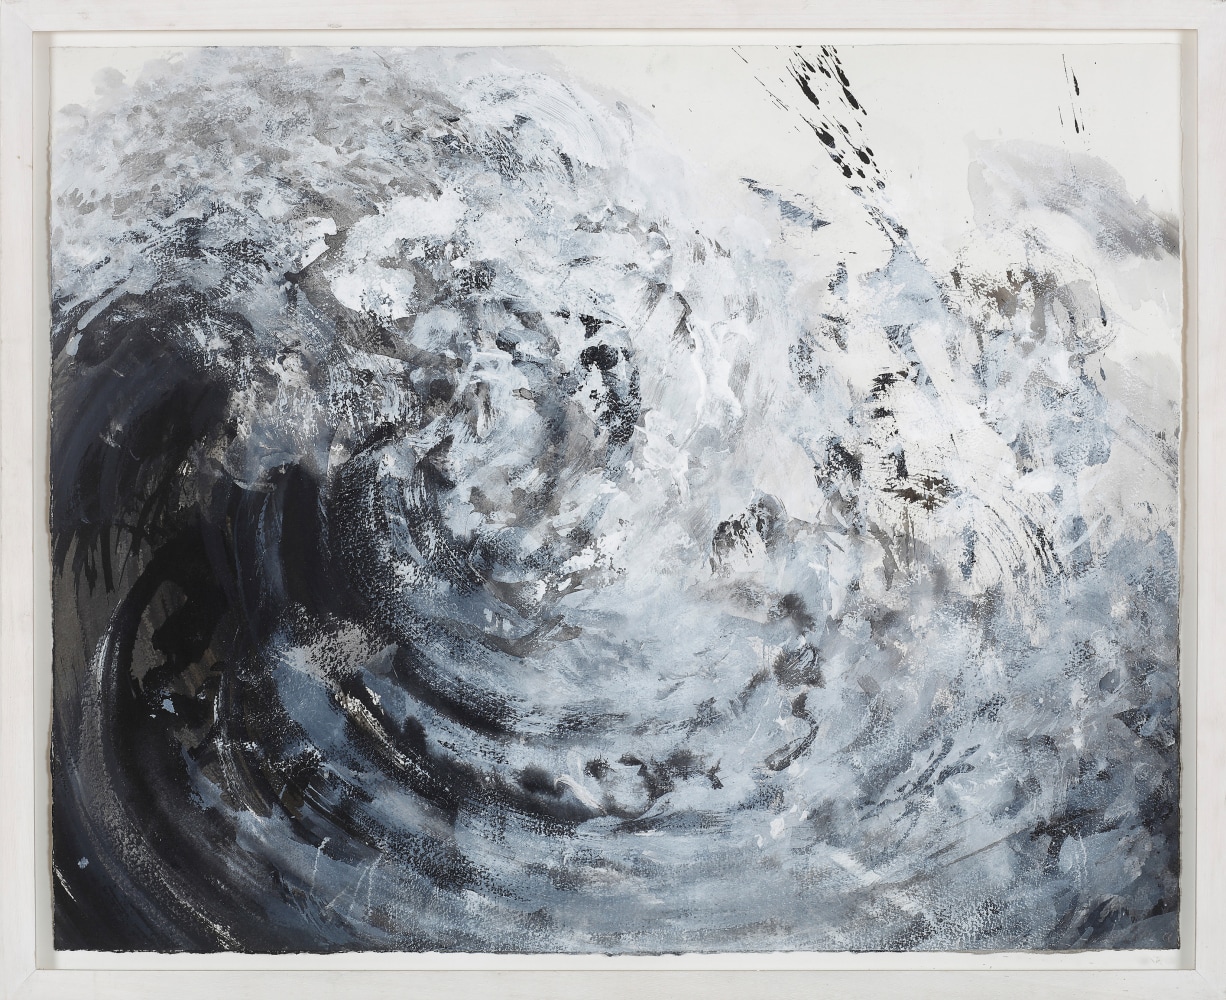 Wave Breaking 4, 2007

ink and acrylic on paper

22 &amp;frac12; x 27 &amp;frac34; in. / 56.5 x 70.5 cm